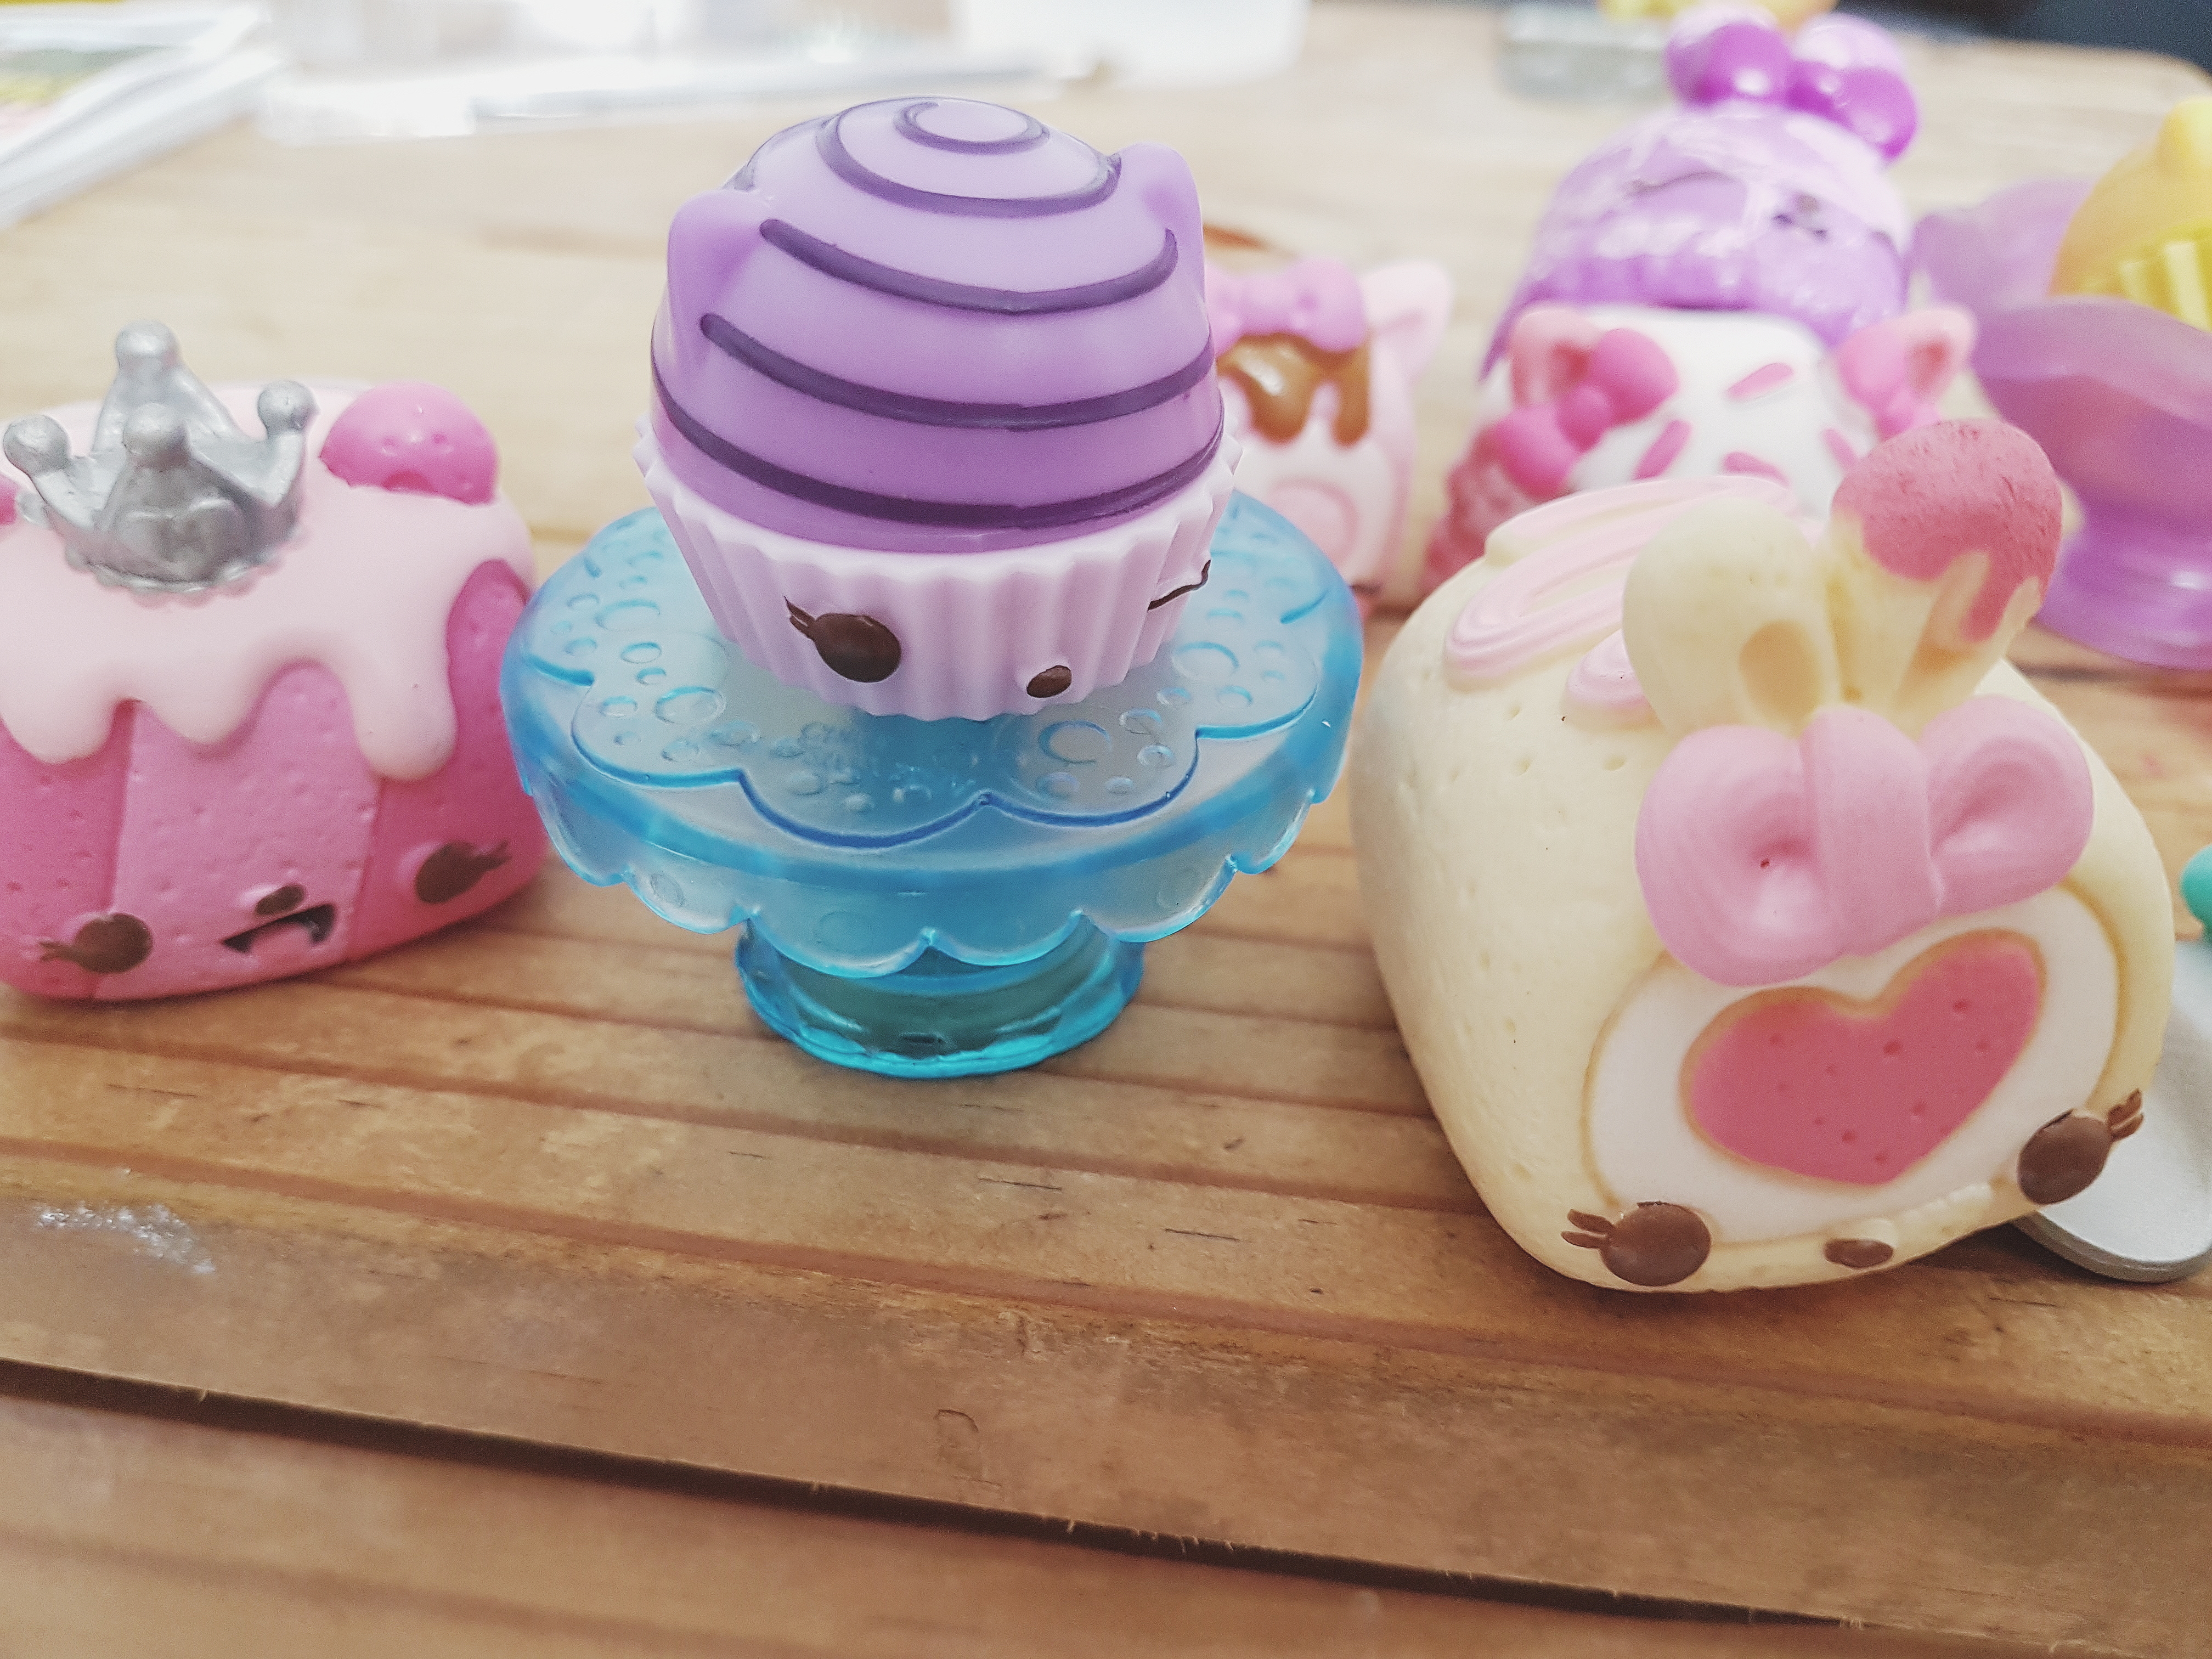 Num Noms Stackable Scented Ice Cream Toys Unboxing BRAND NEW JUST  RELEASED!! BLIND BOX TOO! 